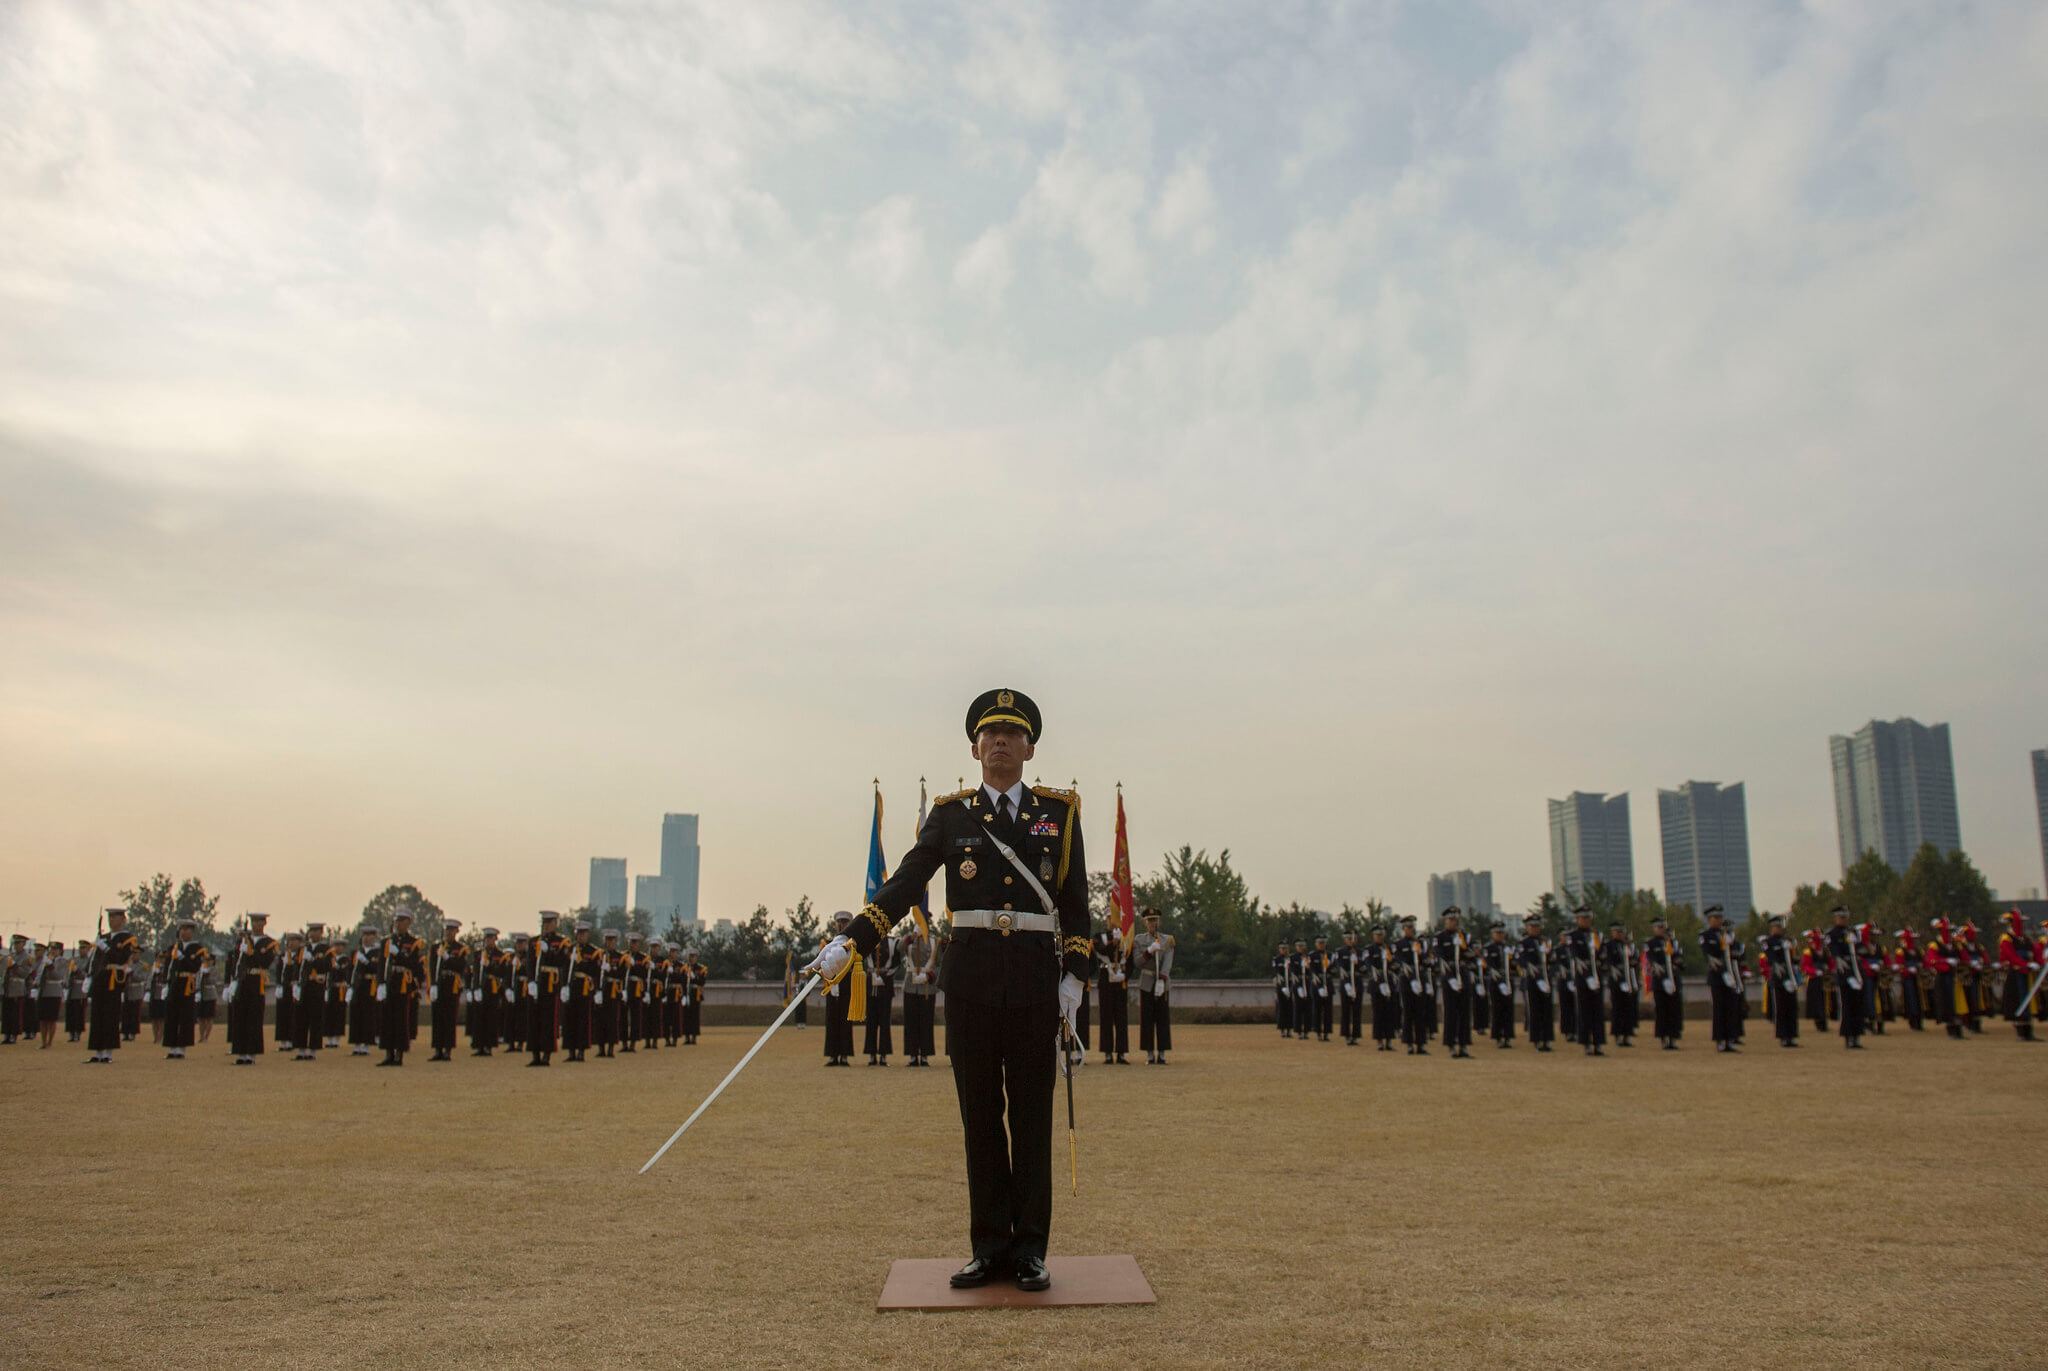 A mililtary demonstration in front of Seoul's skyline